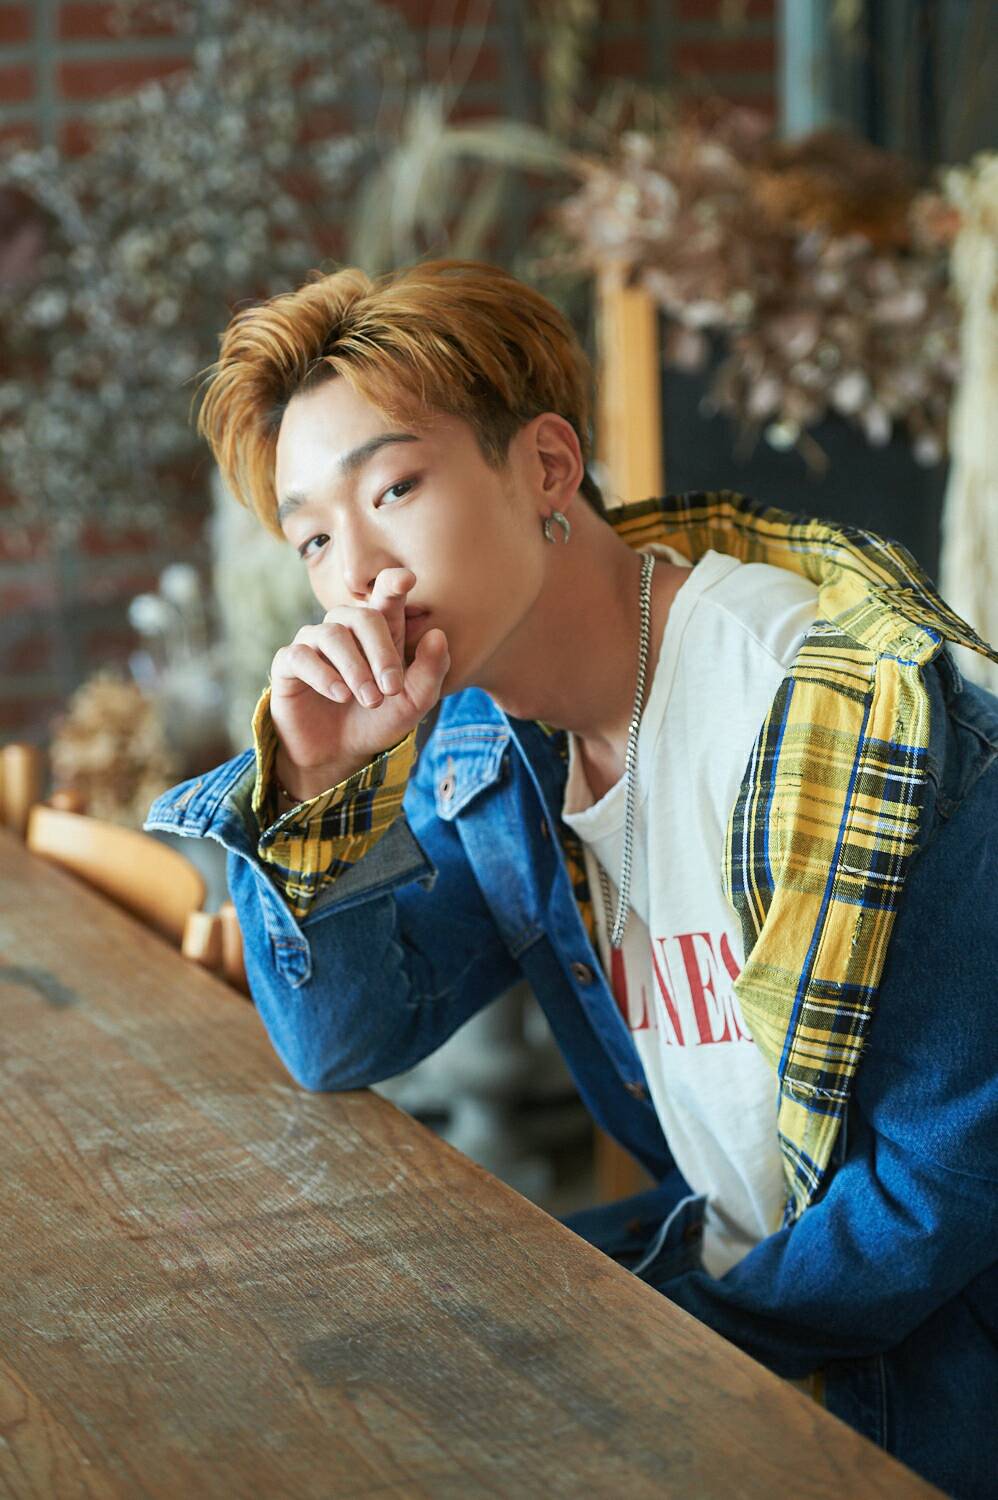 Bobby Blames iKON Members' Faults For The Boycott Against The Group